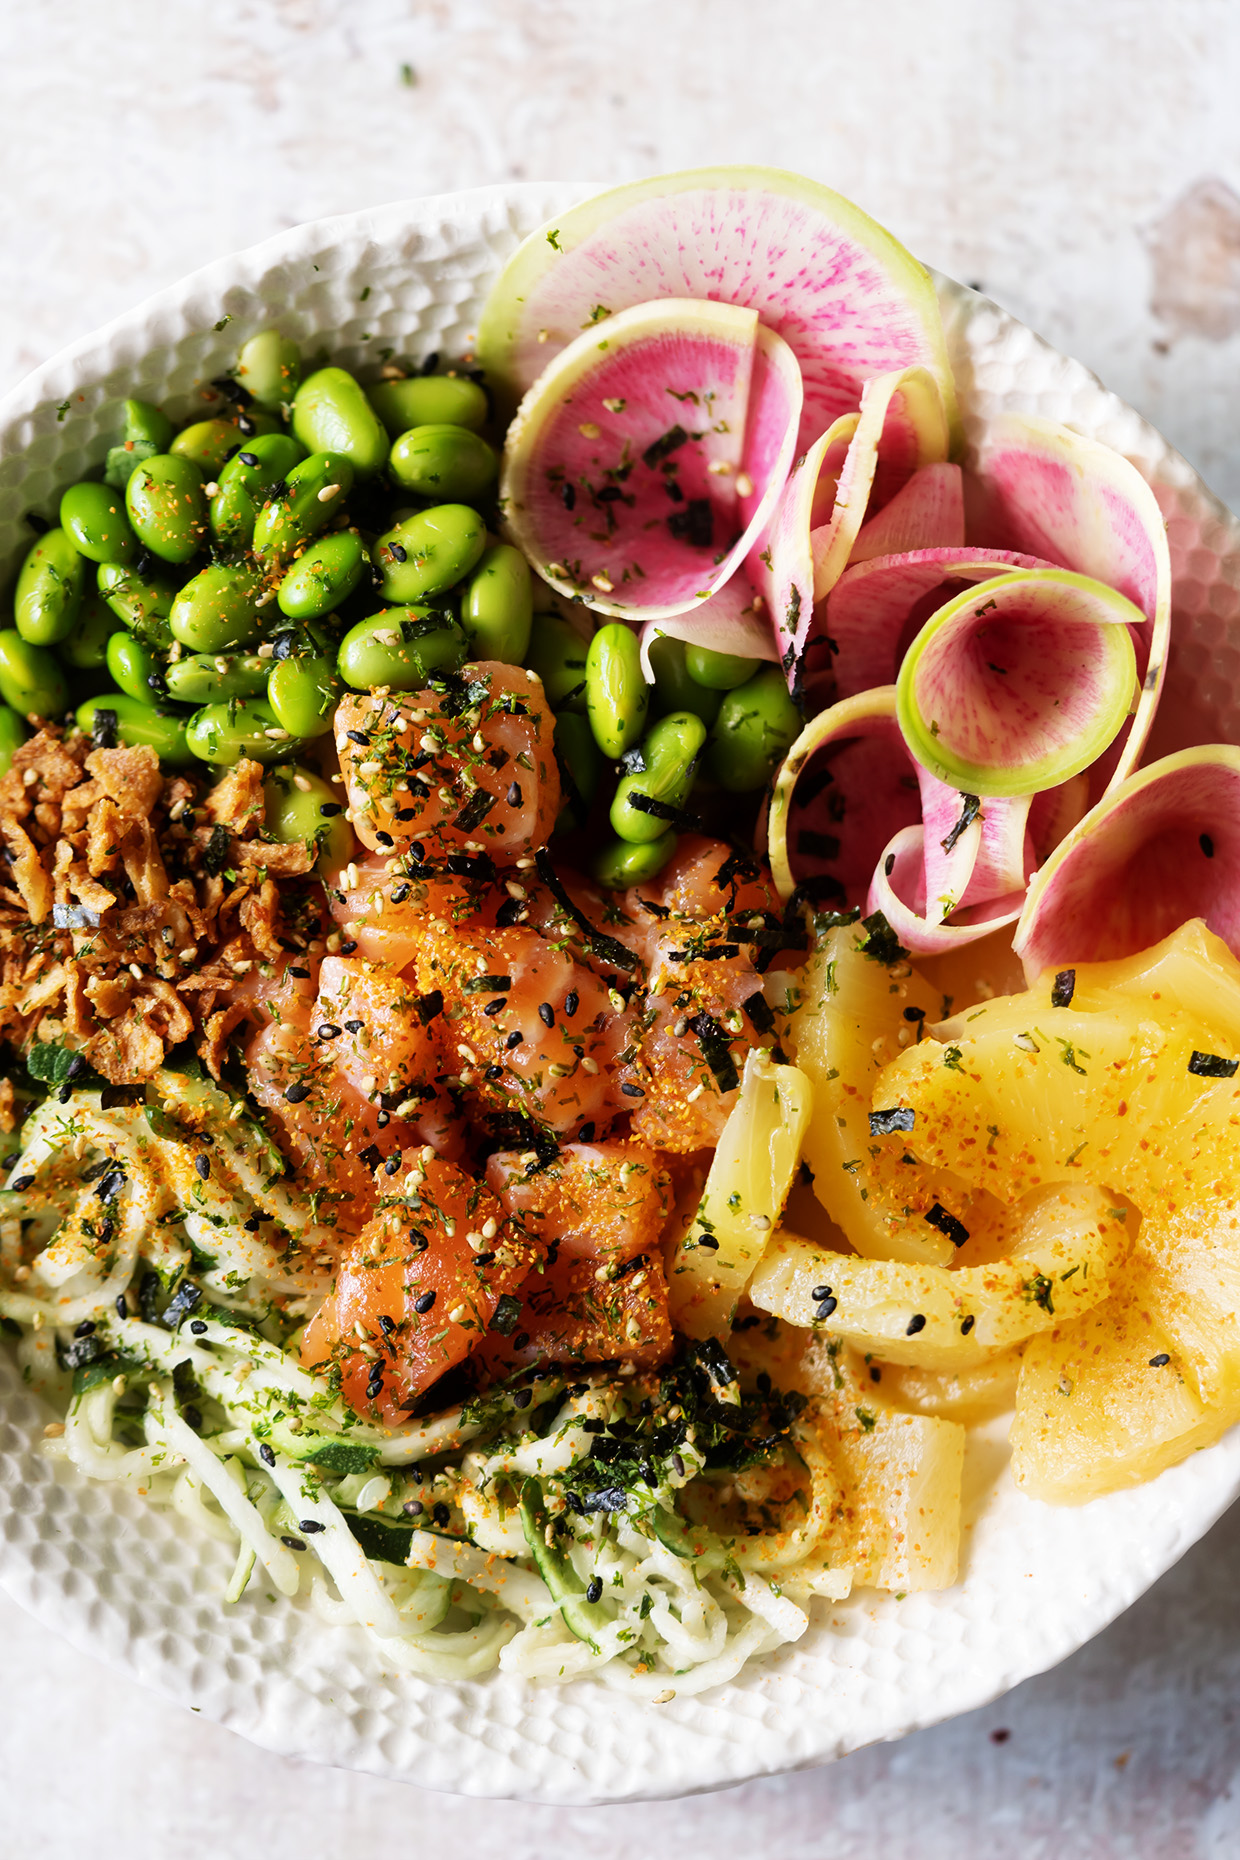 Salmon Poke Bowl with salmon, pineapple rings, radishes, edamame, and zucchini noodles.